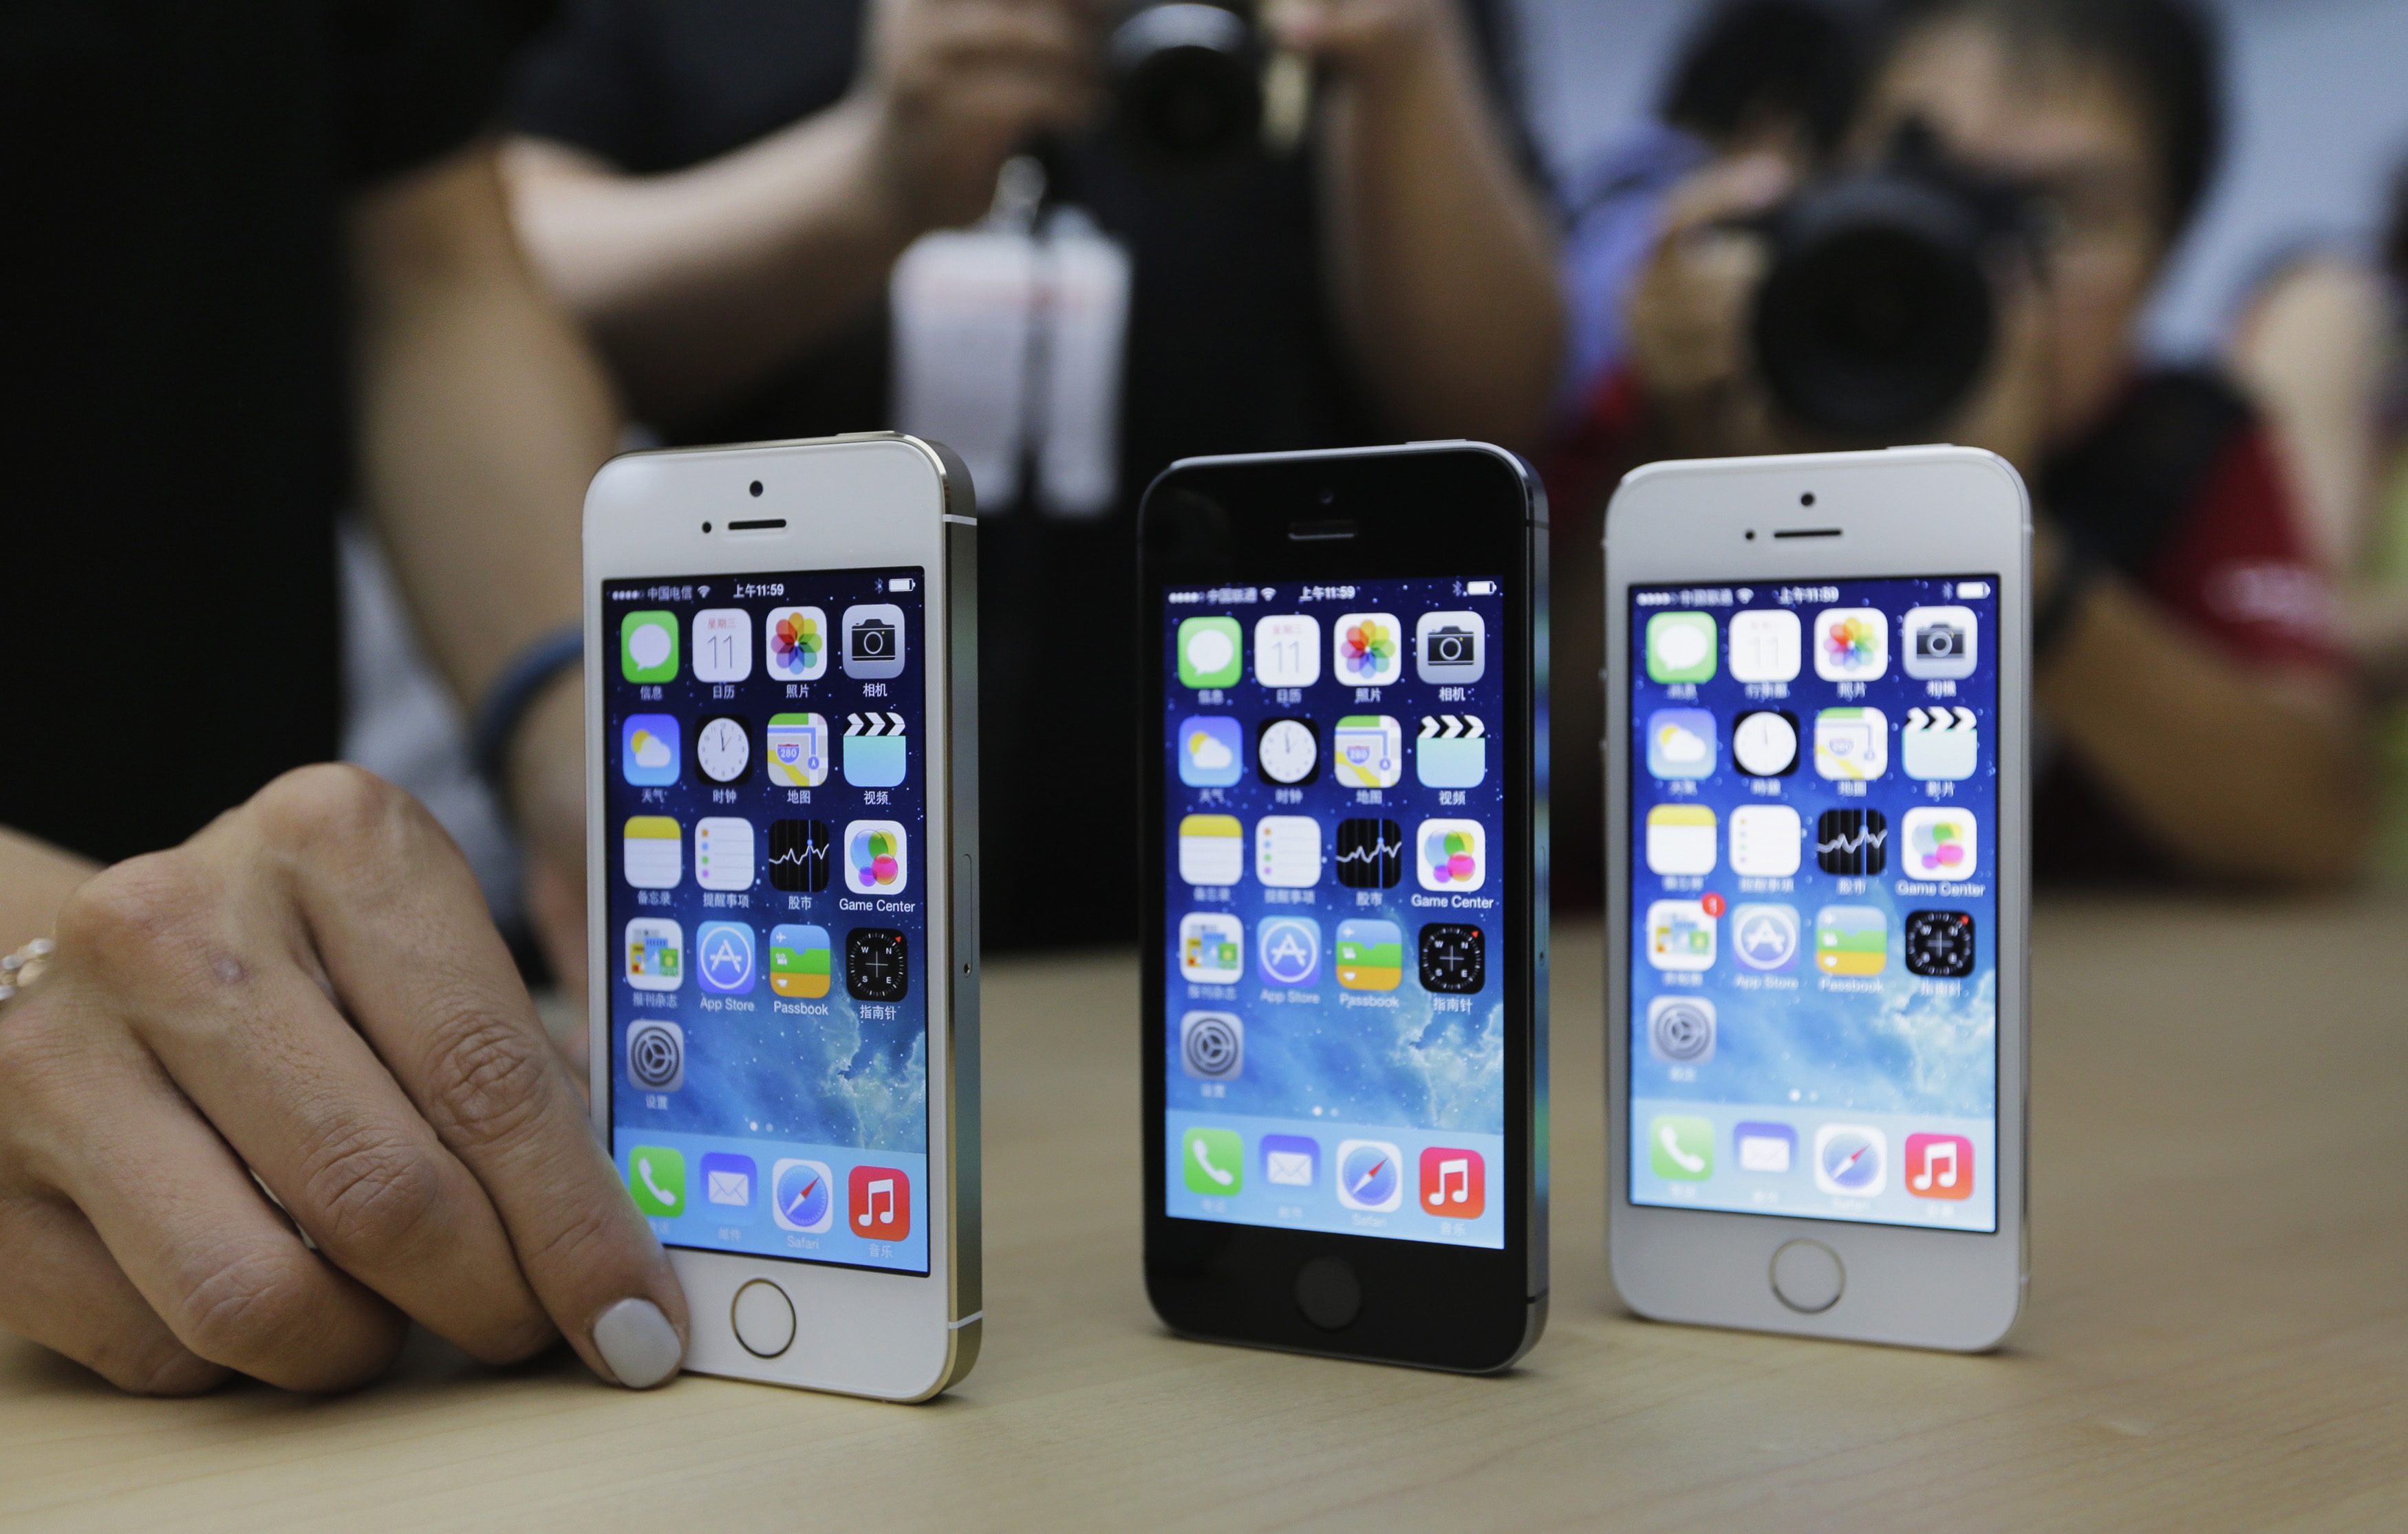 Without Appleâ€™s Help US Justice Dept Claims To Have Succeeded In Unlocking Encrypted iPhone